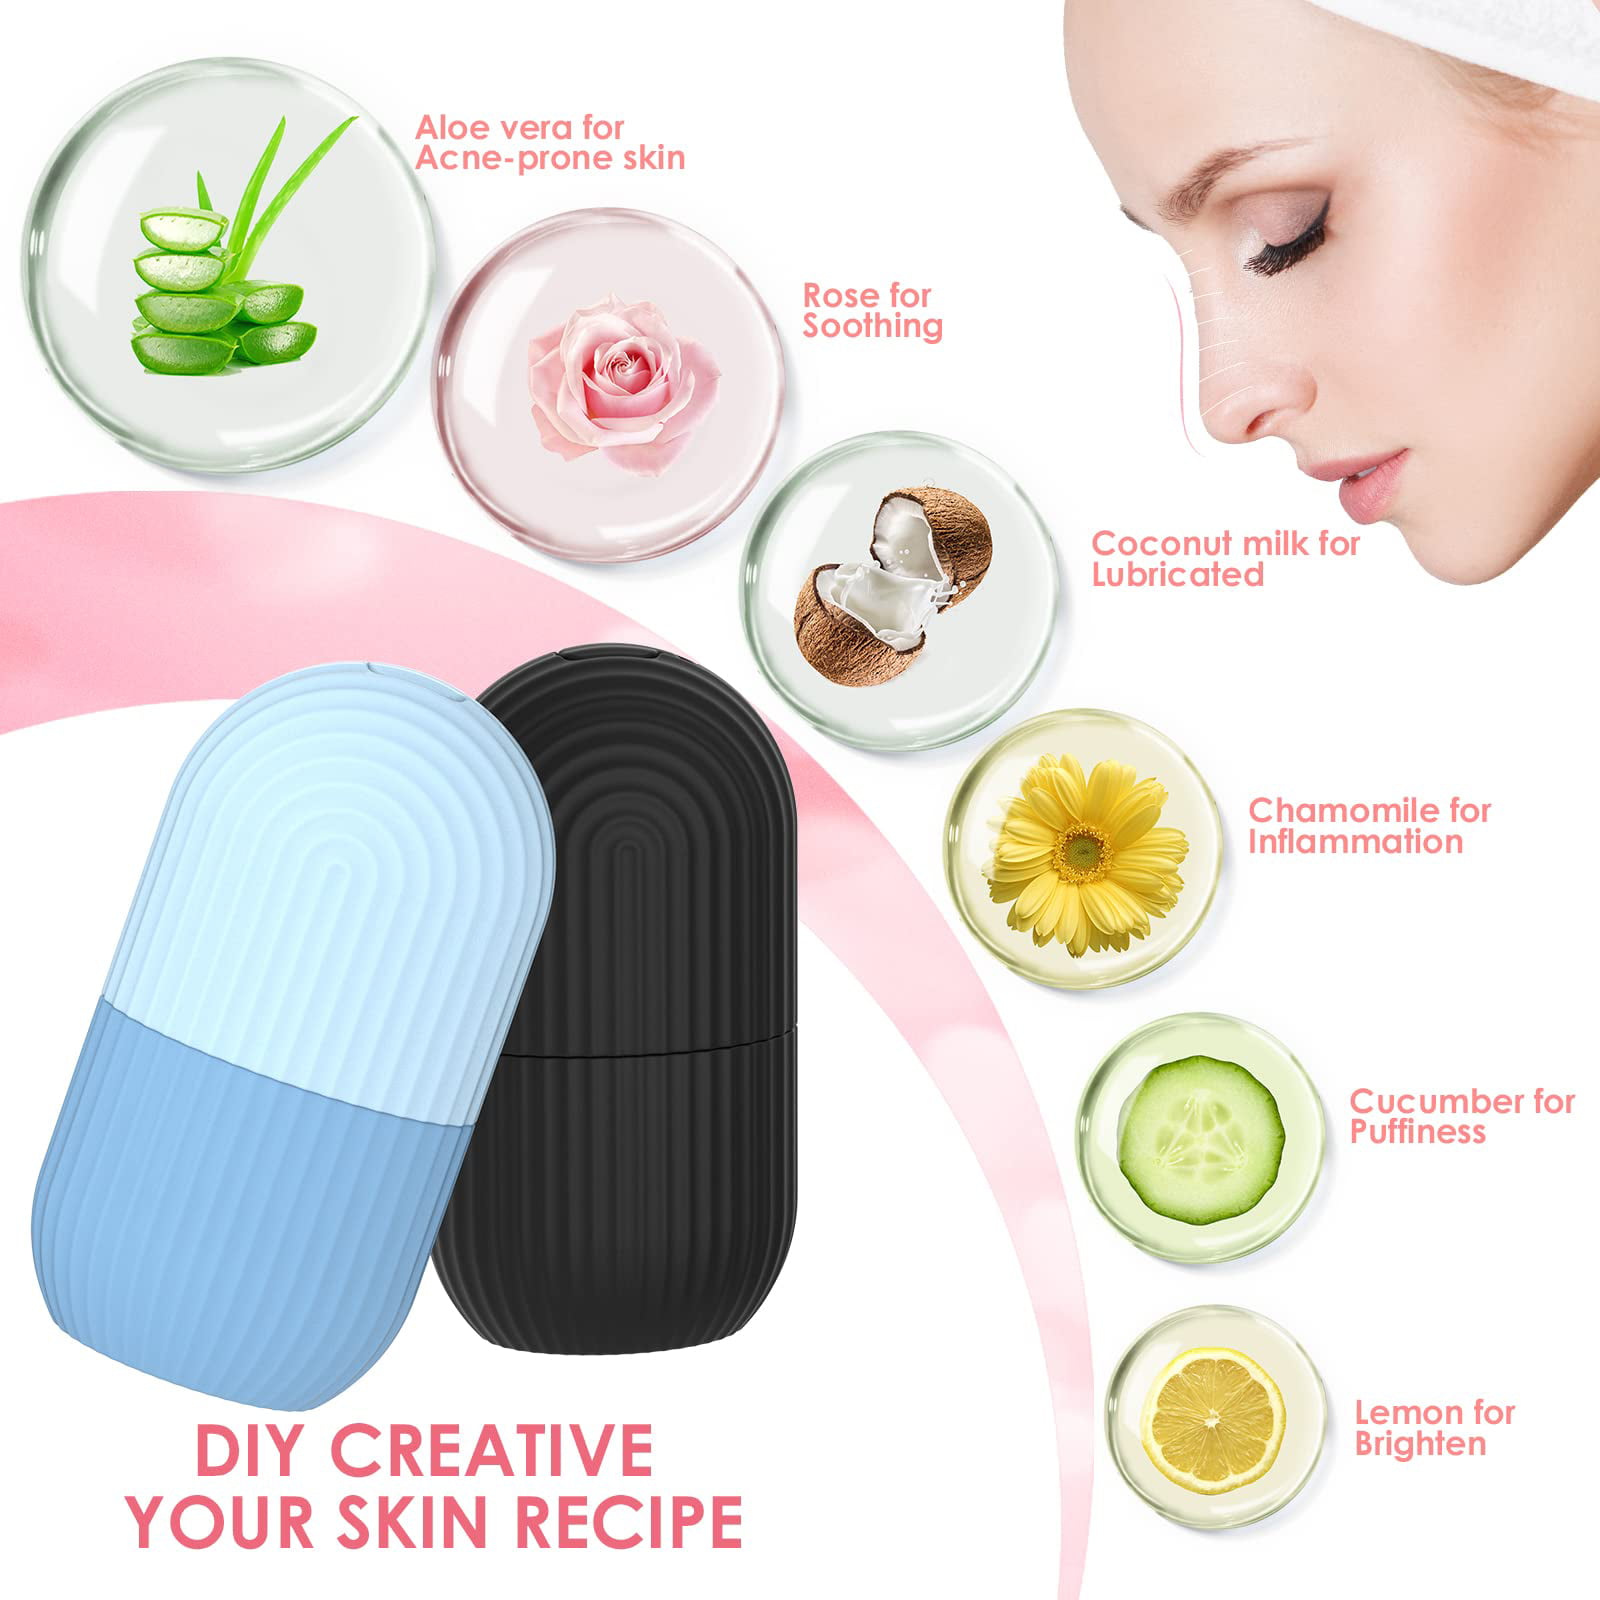 Ice Cube Tray Rolling Ice Deepen Contours Repairs Skin Silicone Ice Tray  Molds Rollers Ball Globe Ice Care for Daily Care Capsule Creative Face Hand